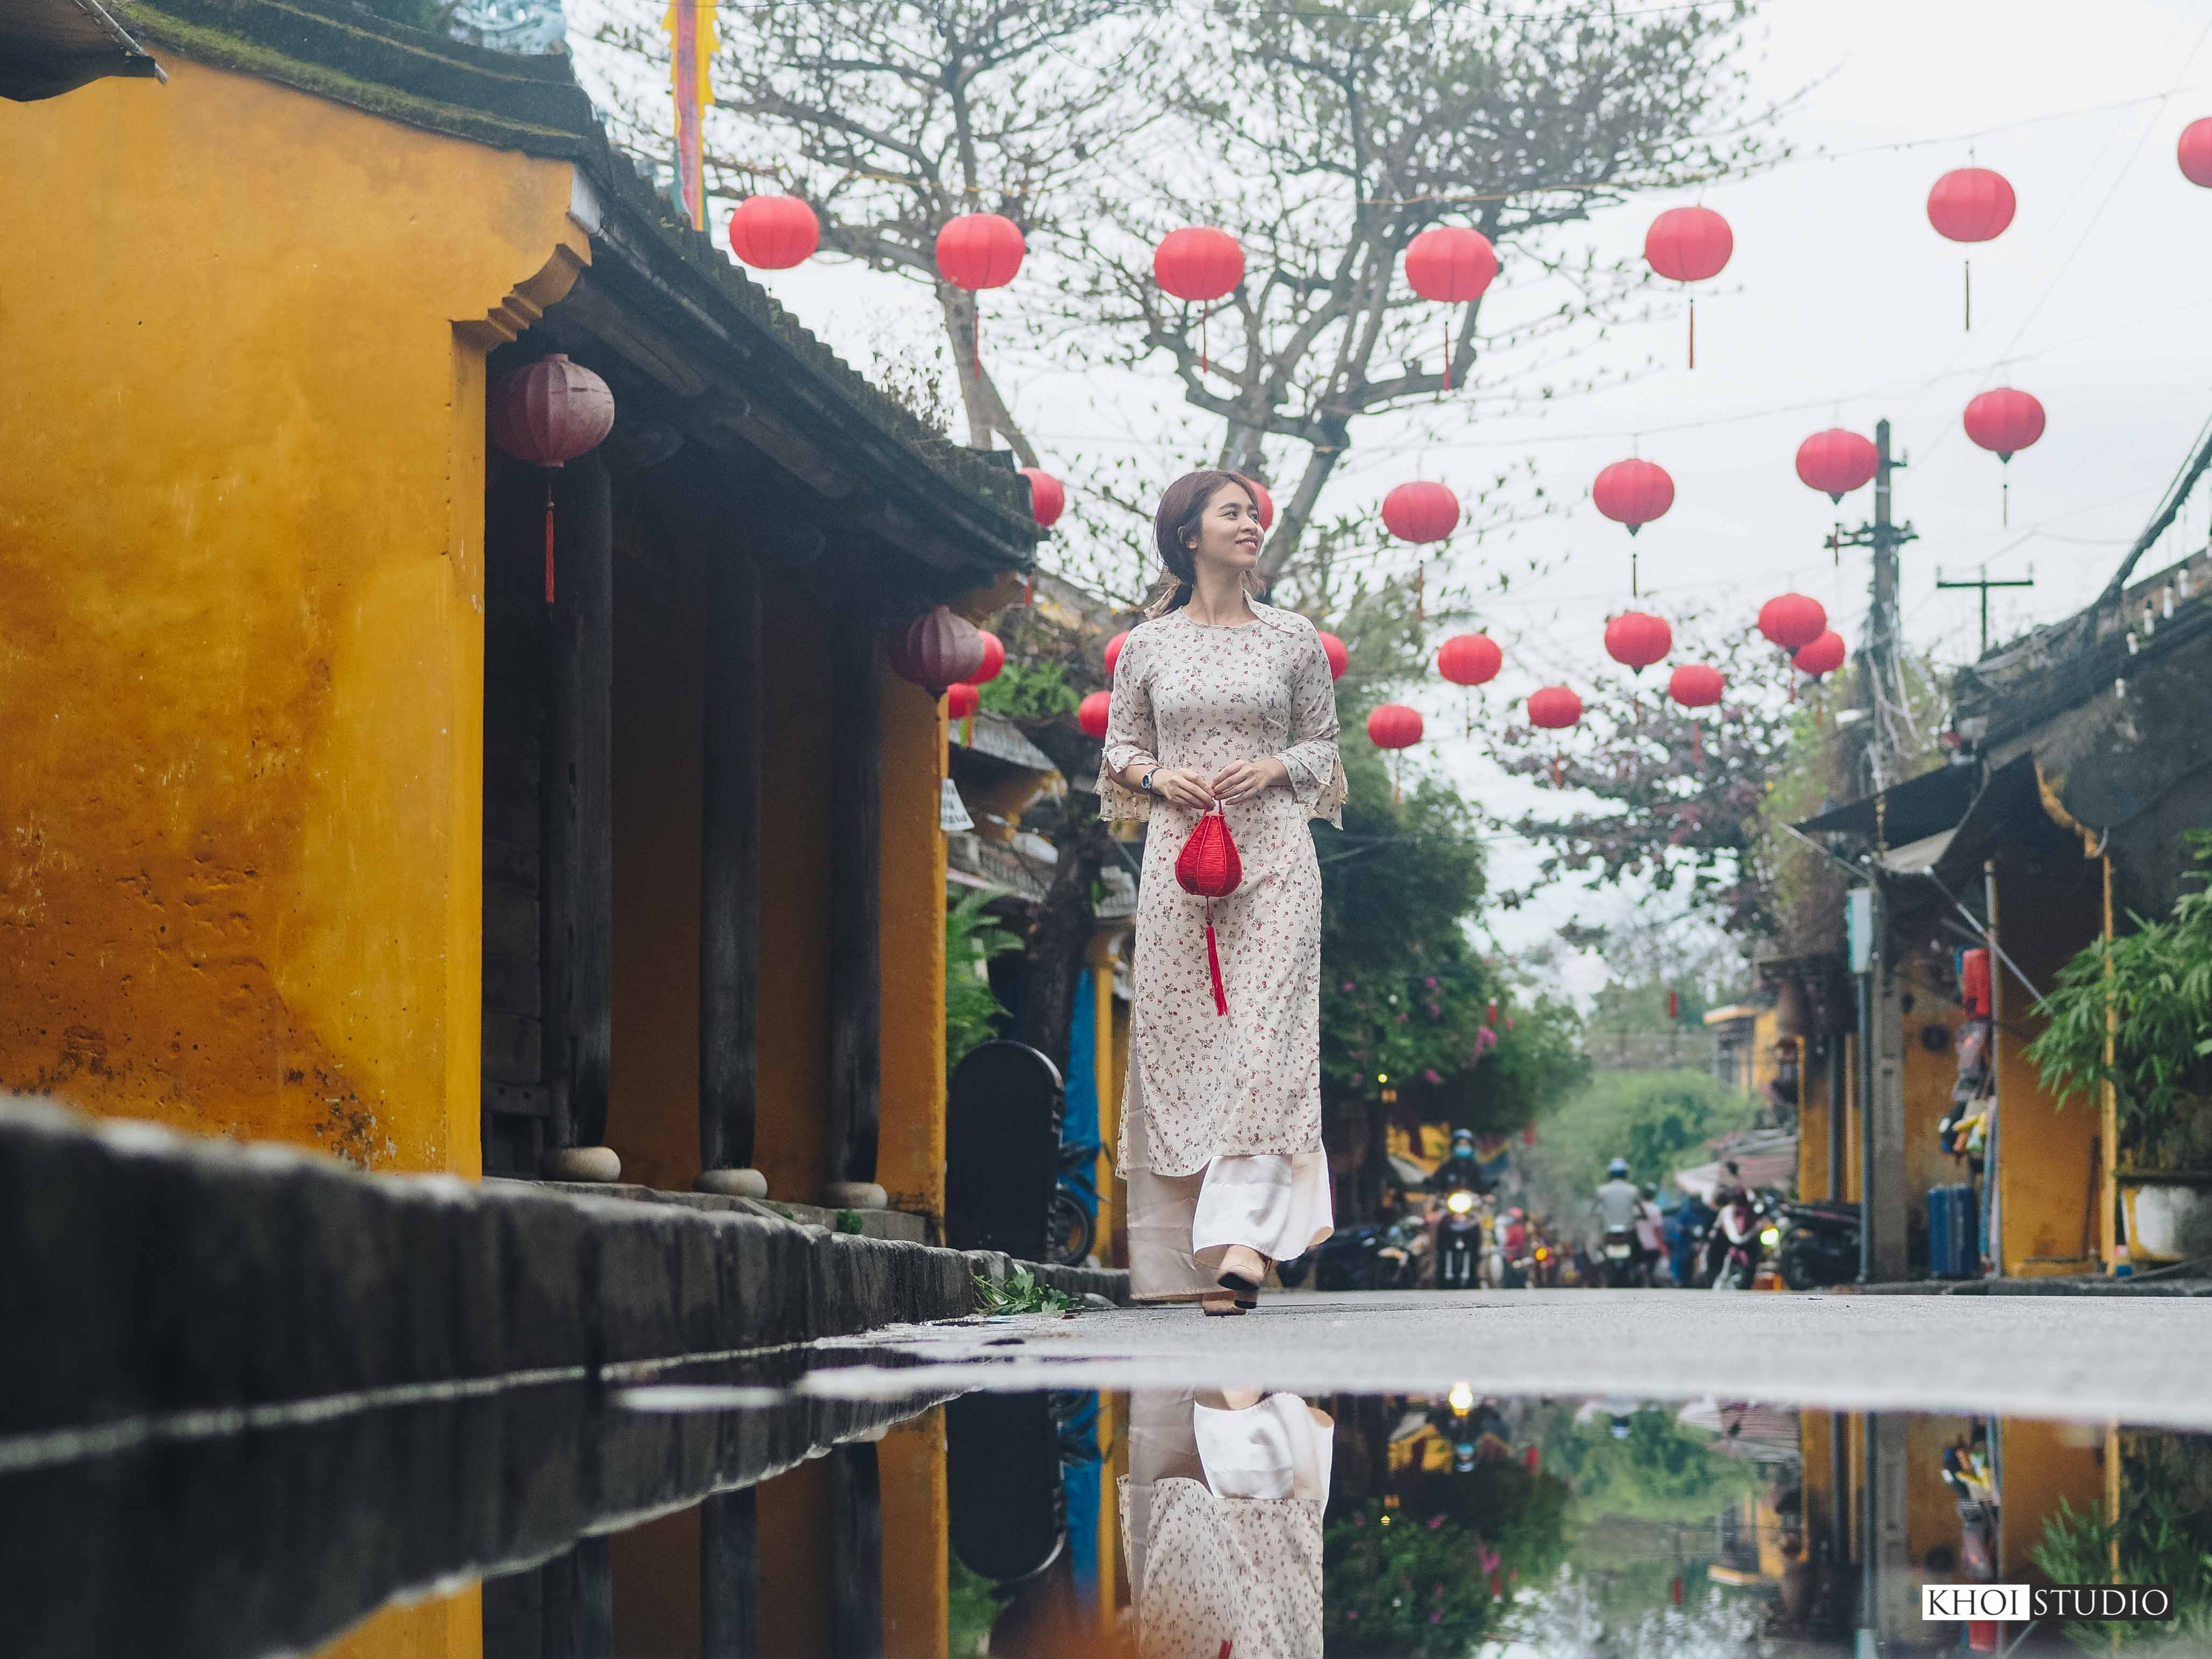 find-a-travel-photographer-in-da-nang-hoi-an-take-photos-of-ao-dai-in-the-rainy-season-in-the-old-town